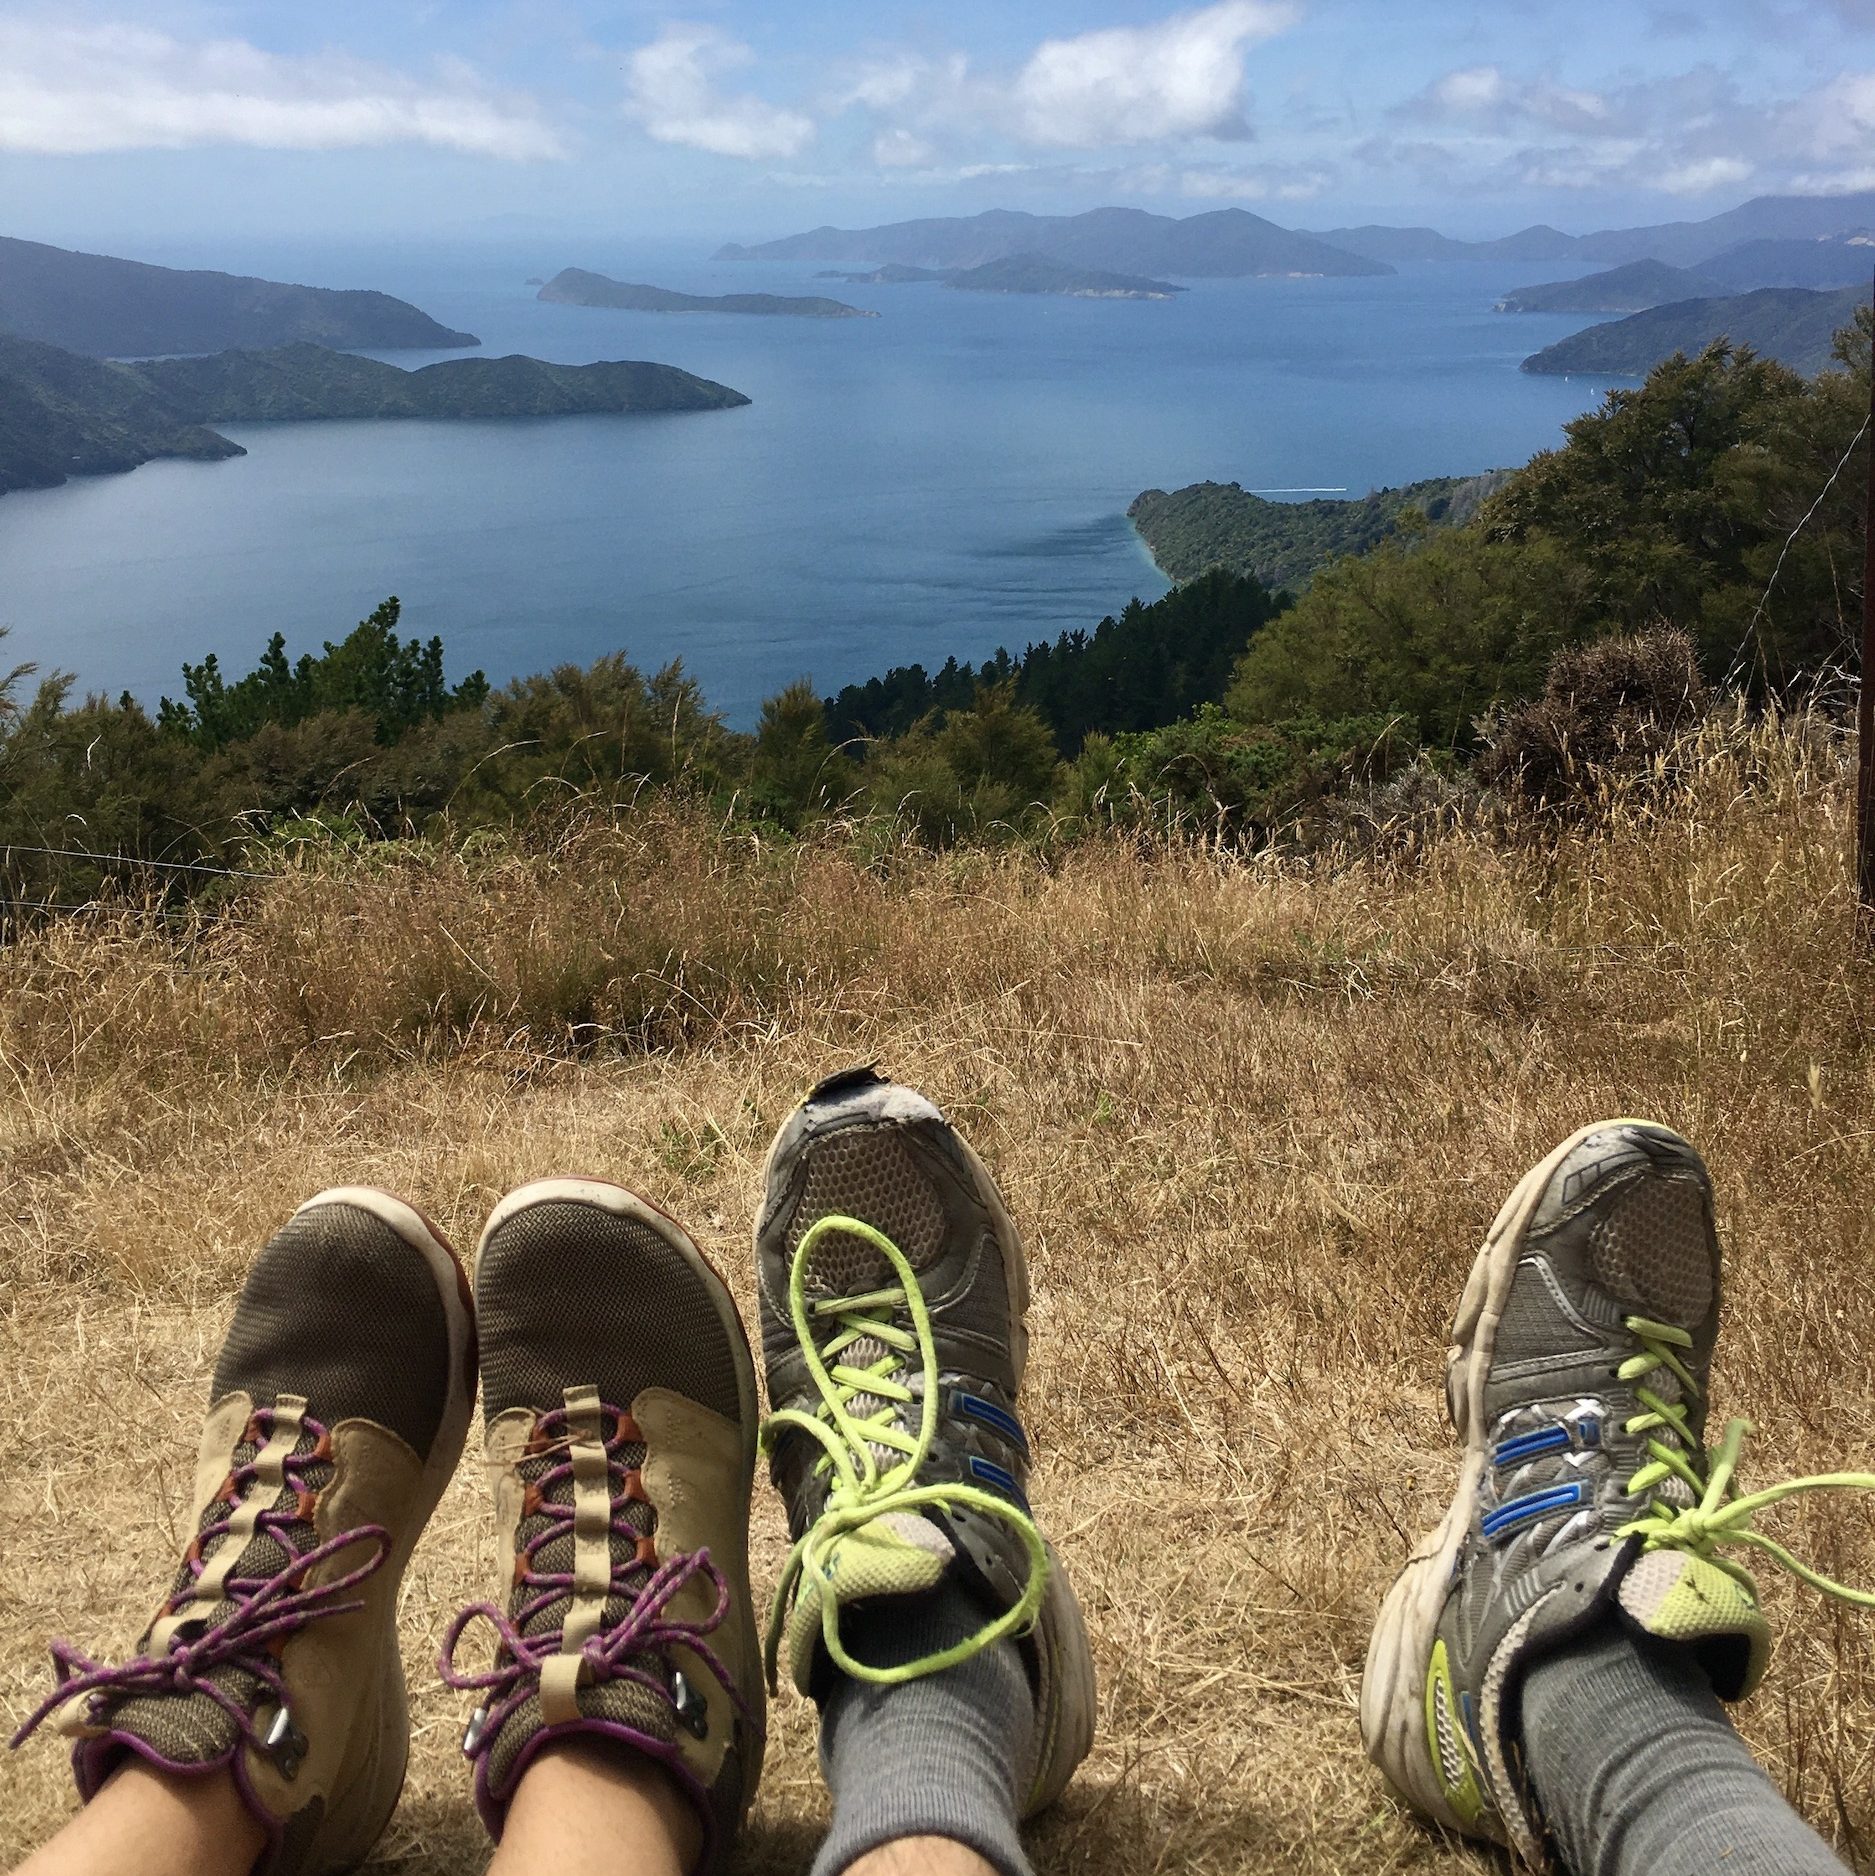 Hiking boots in front of the view from Queen Charlotte Track, Picton, New Zealand